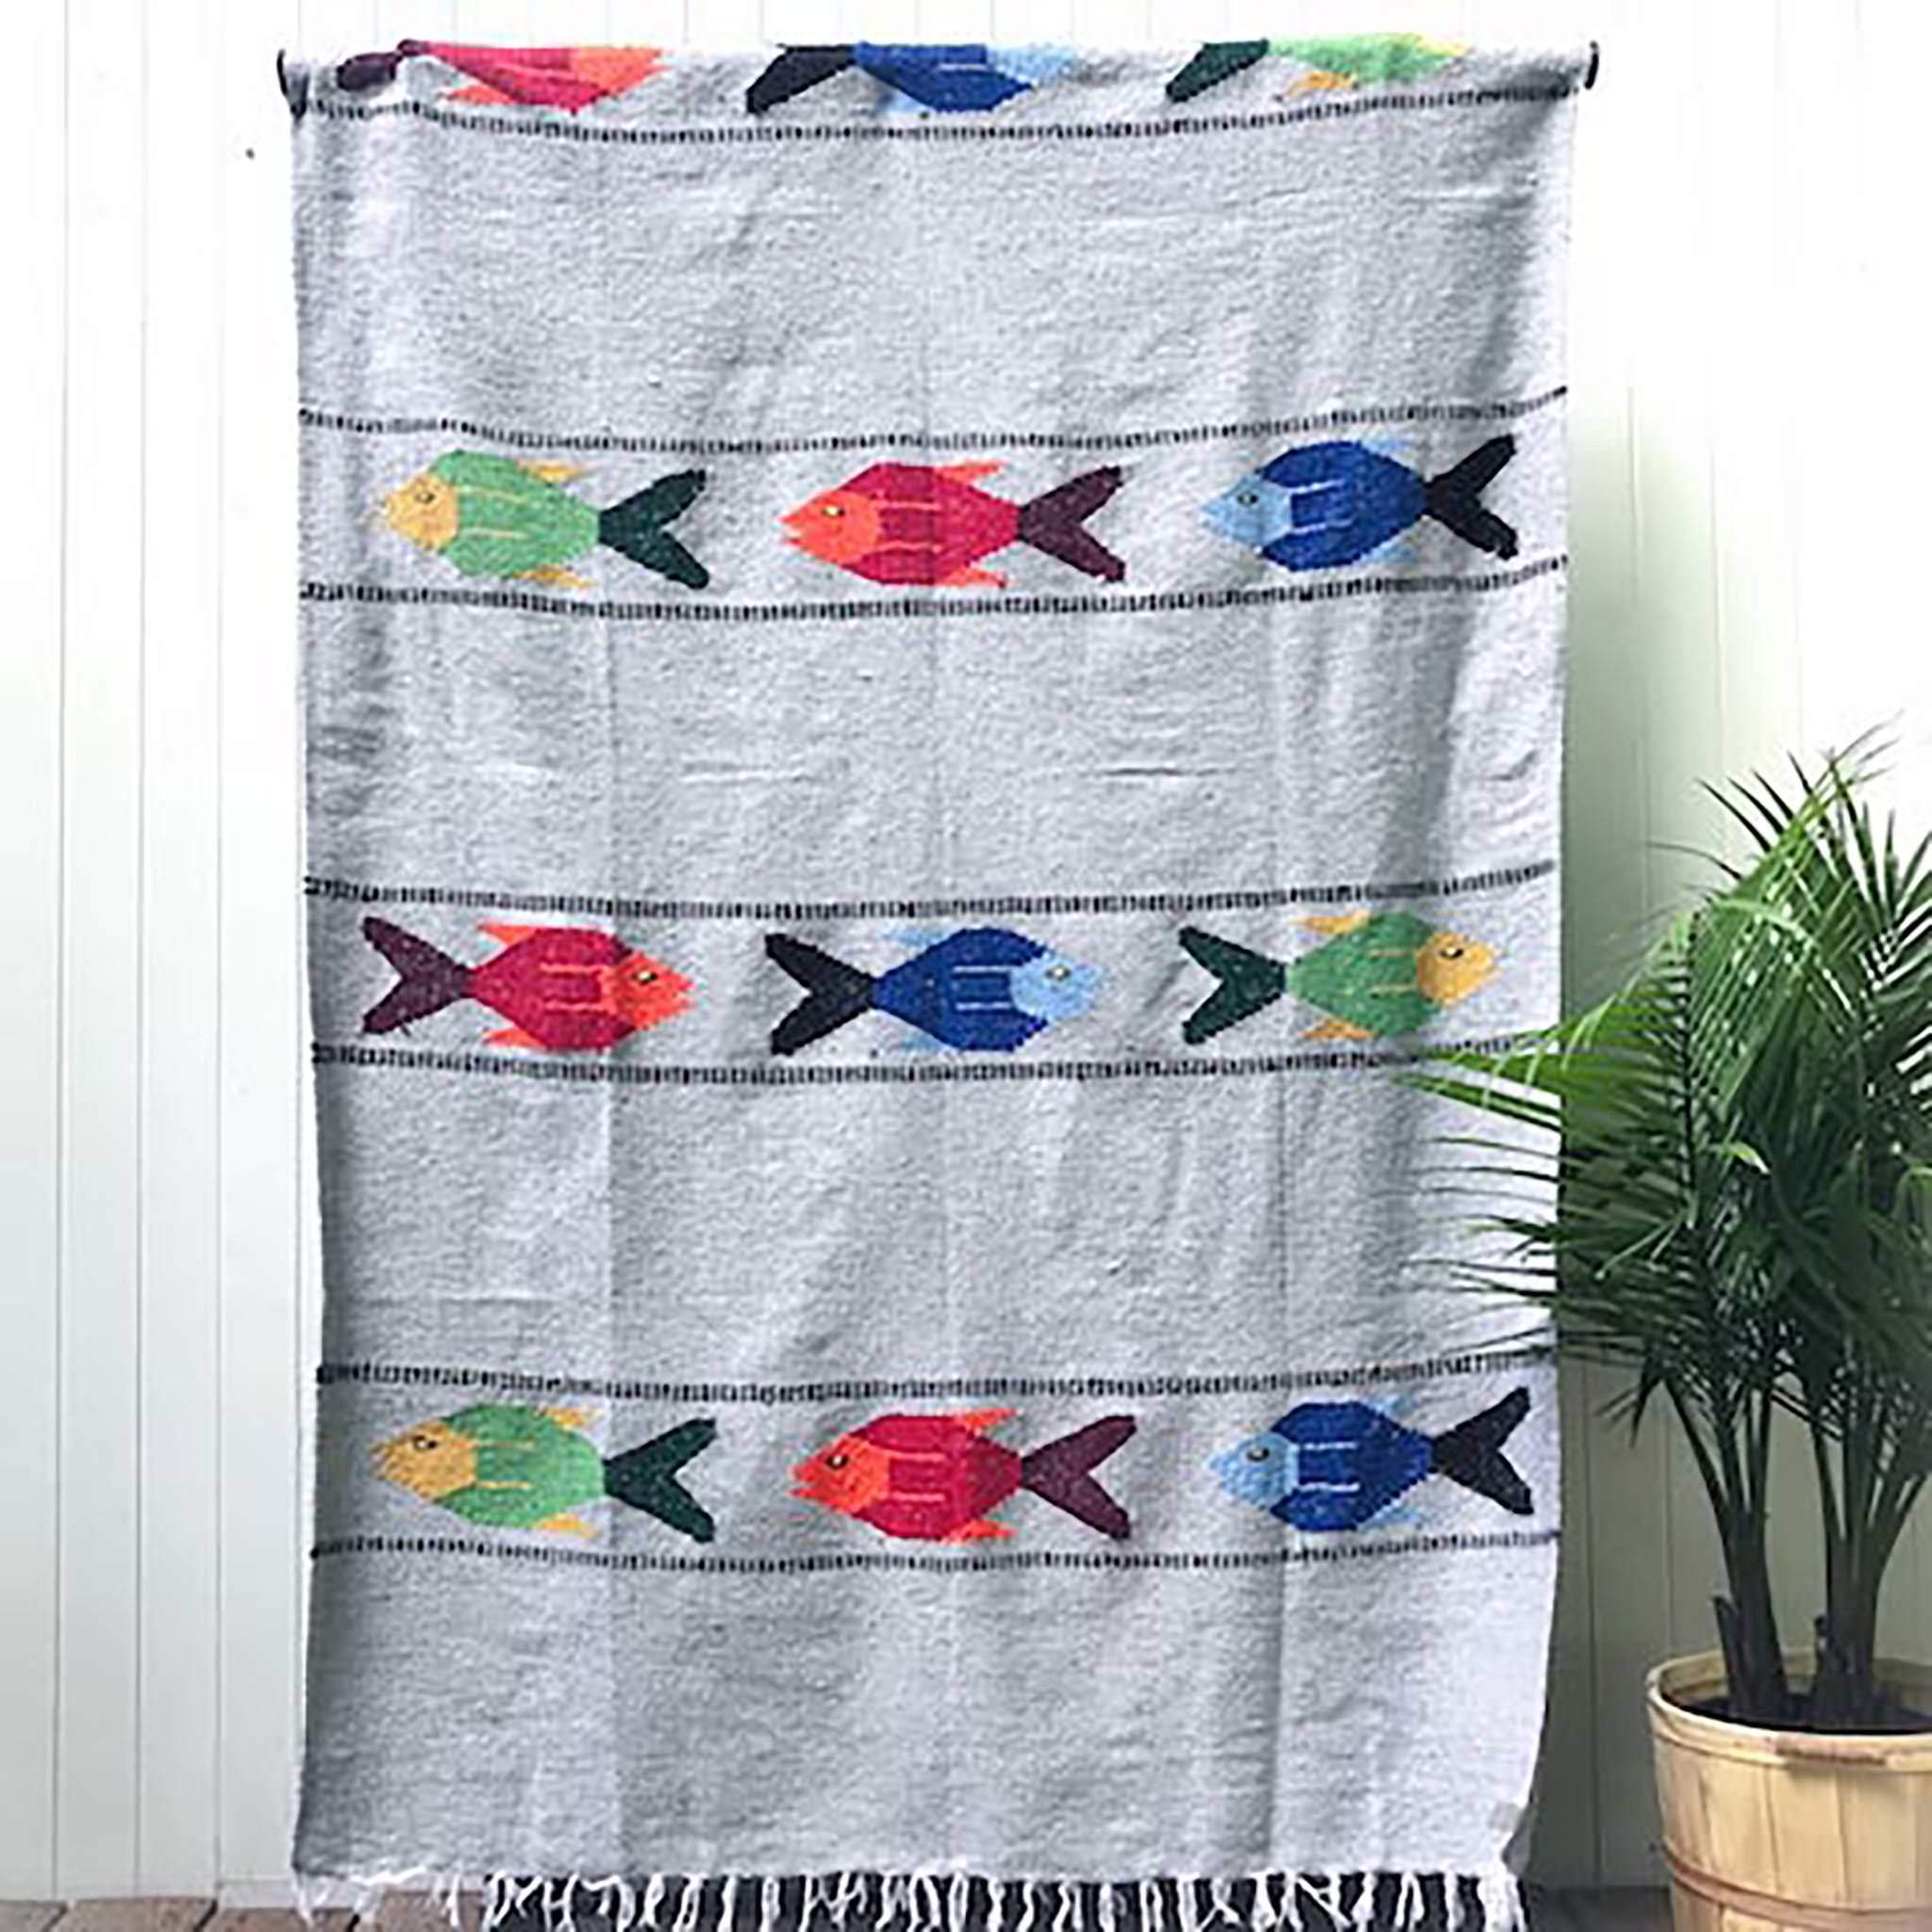 Woven blanket in light grey with pattern of three multicolored fish in four alternating stripes, with white fringed edge, shown hanging against white wall with potted palm plant at side.